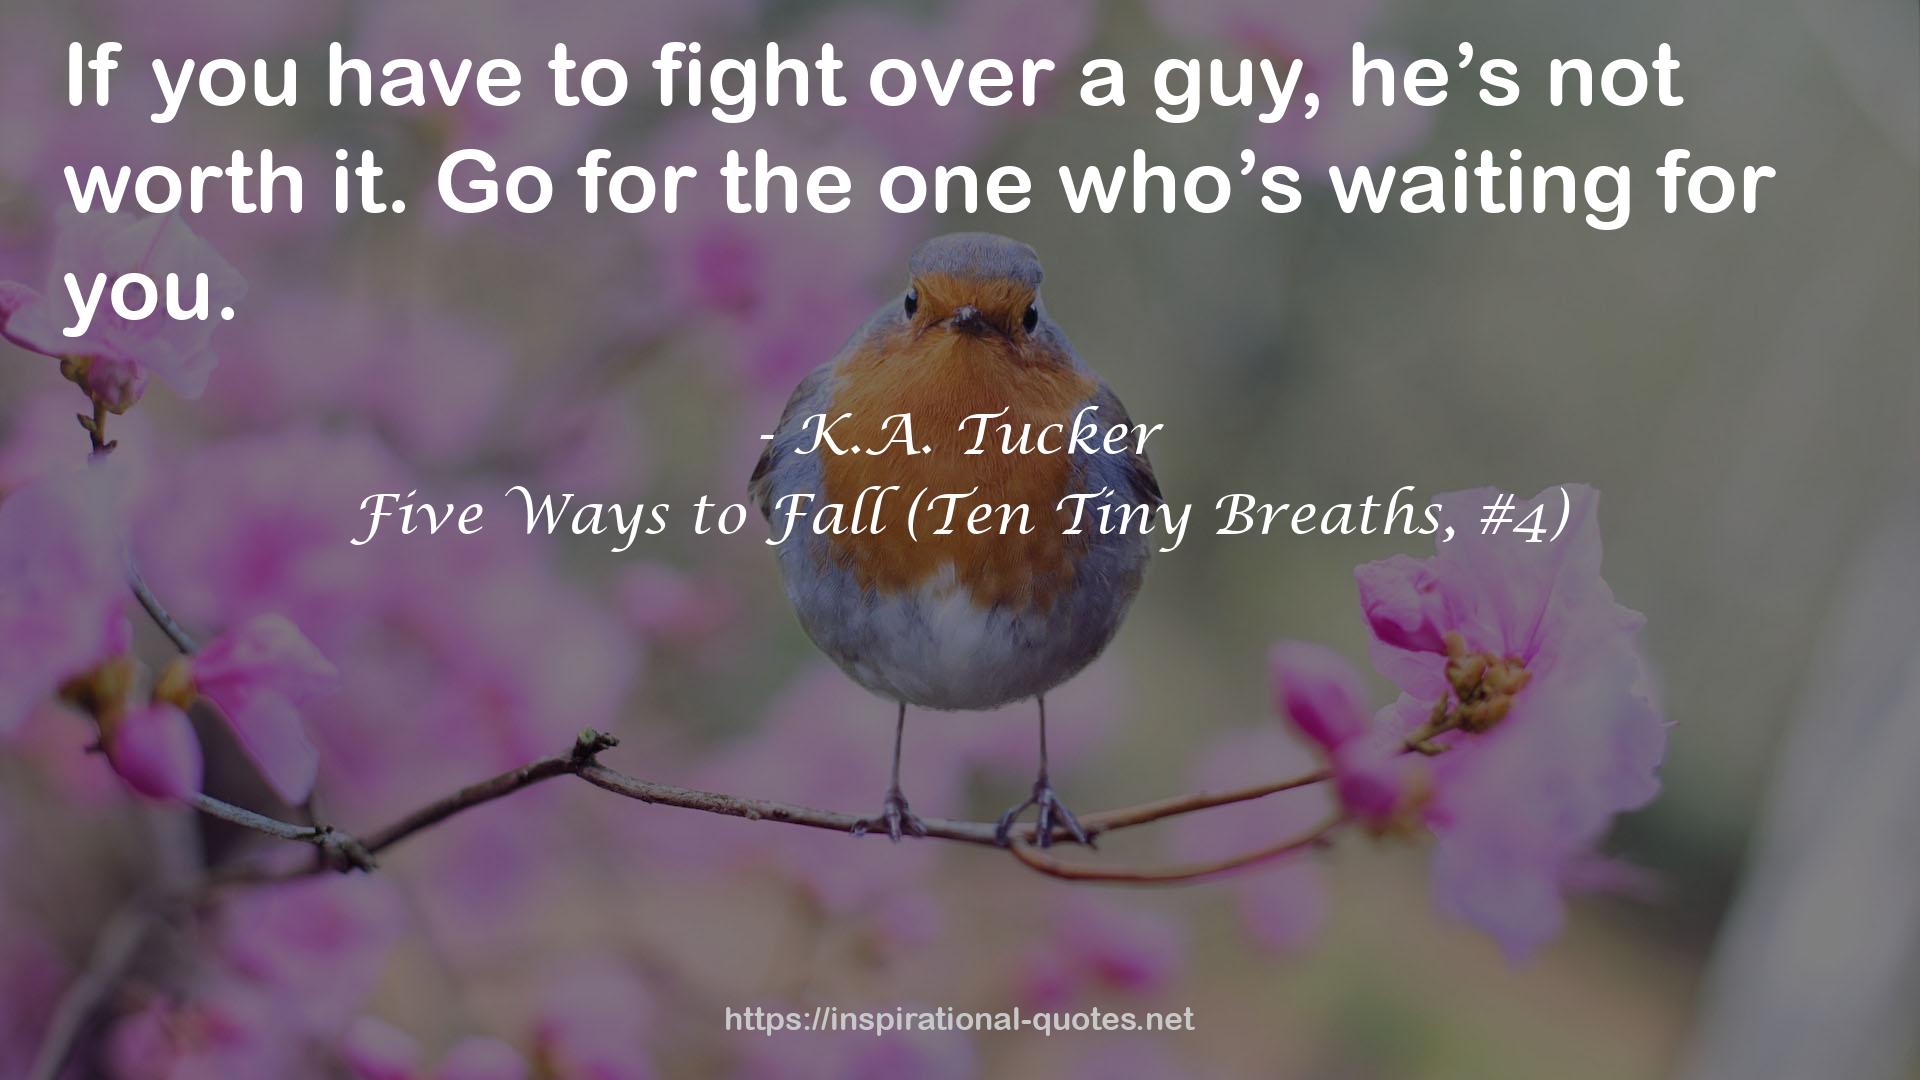 Five Ways to Fall (Ten Tiny Breaths, #4) QUOTES